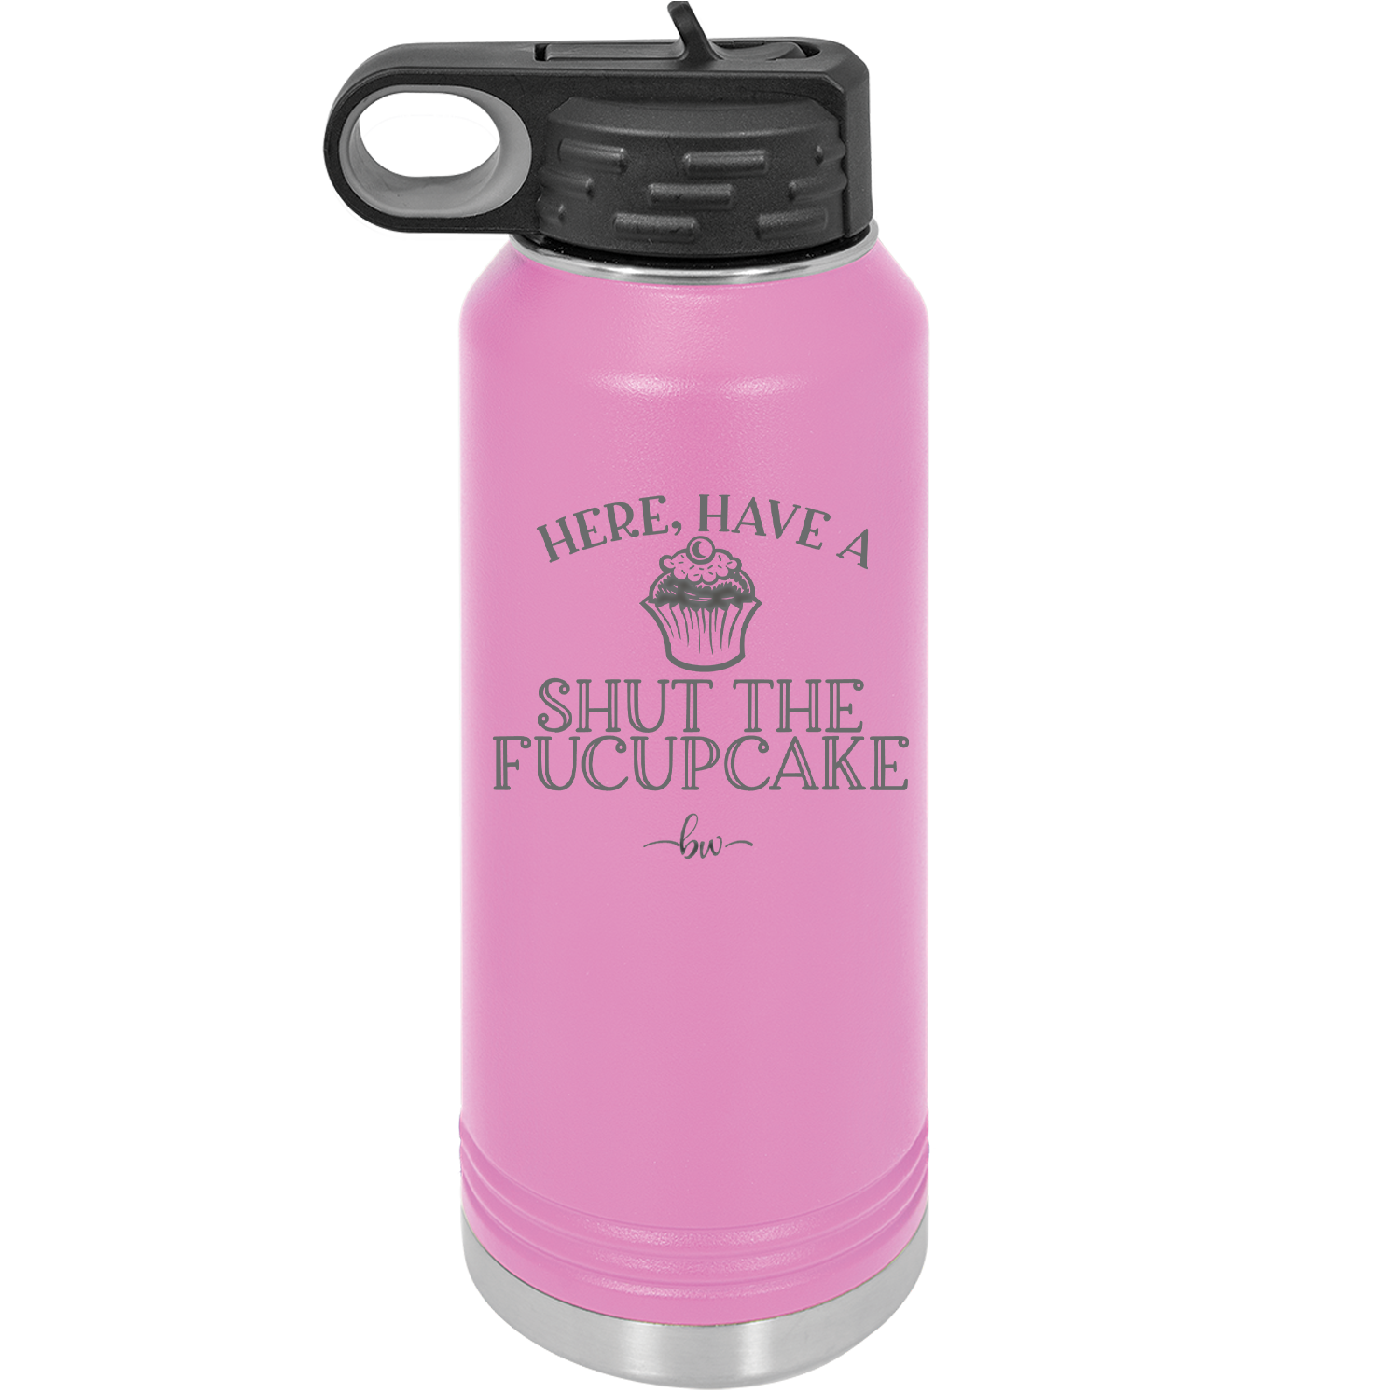 Here Have a Shut the Fucupcake - Laser Engraved Stainless Steel Drinkware - 2407 -